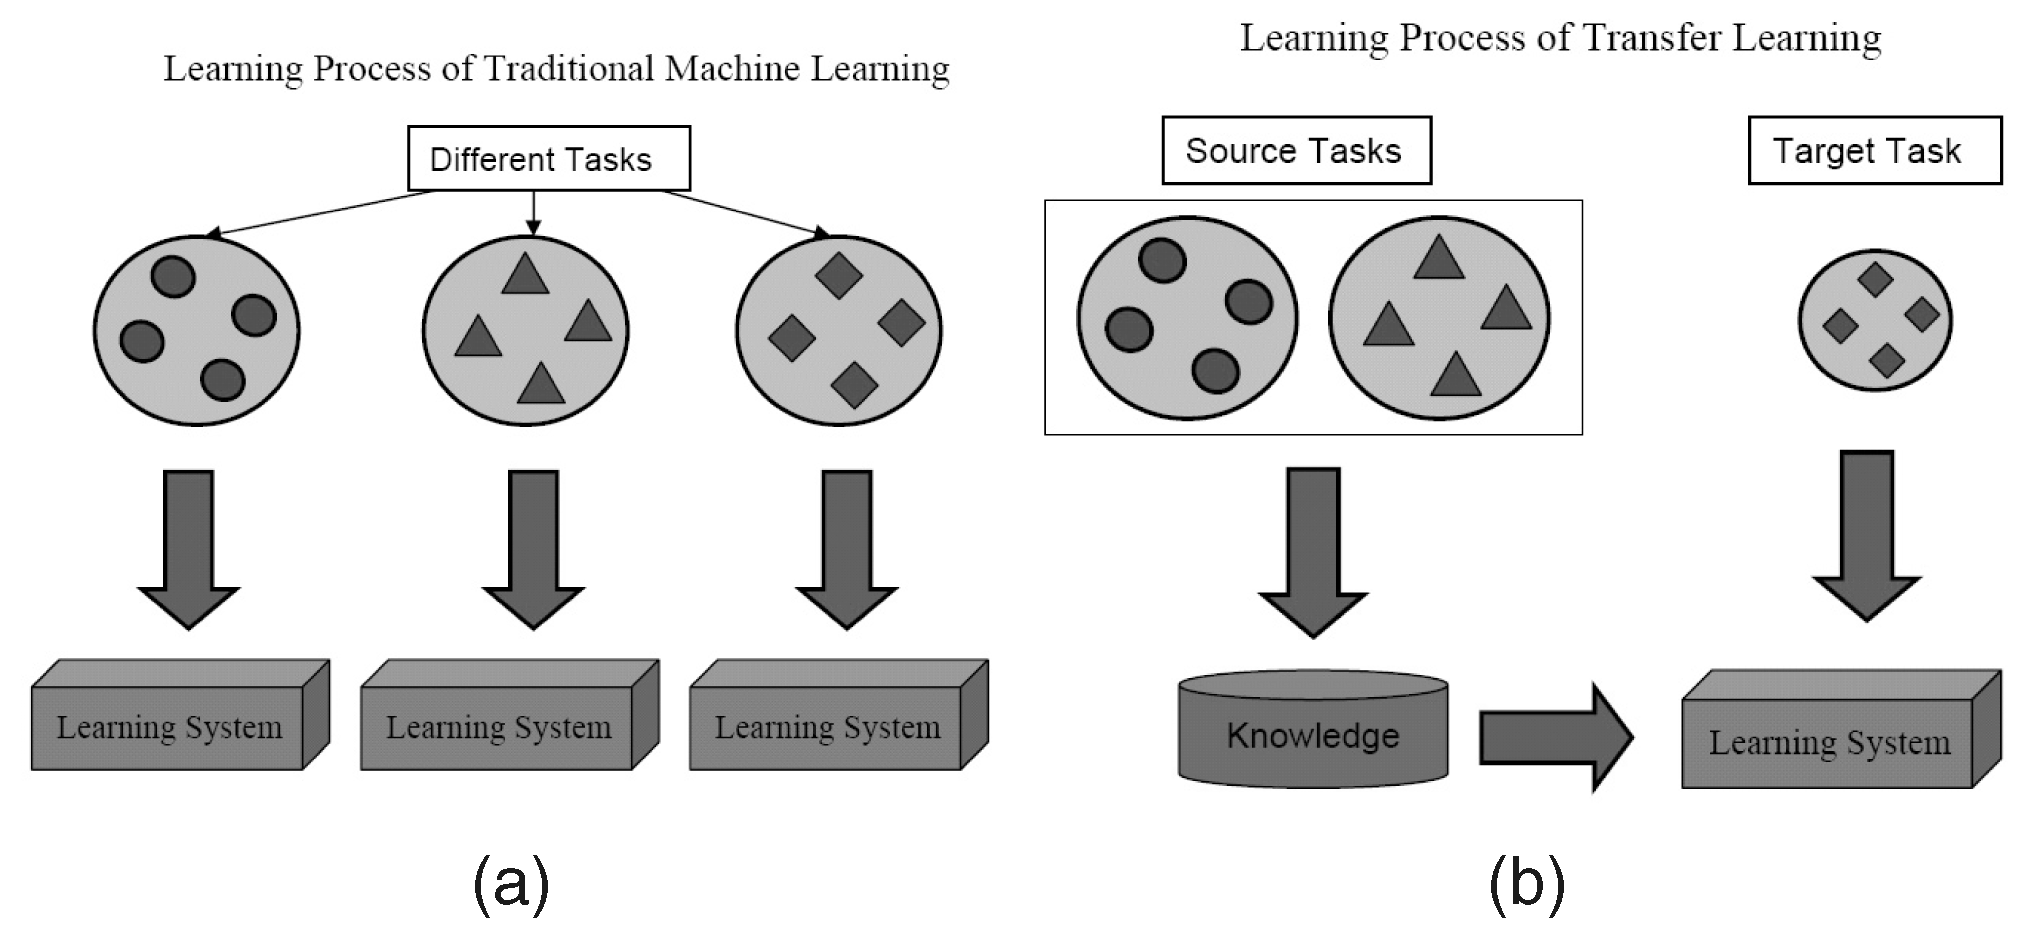 Learning process of transfer learning